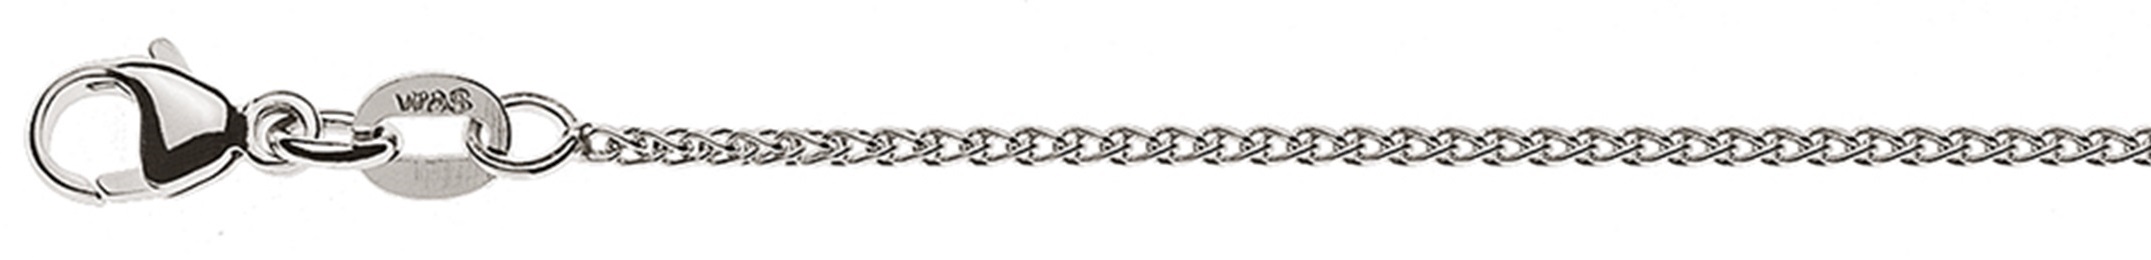 AURONOS Style Necklace white gold 9K cable chain 40cm 1.2mm